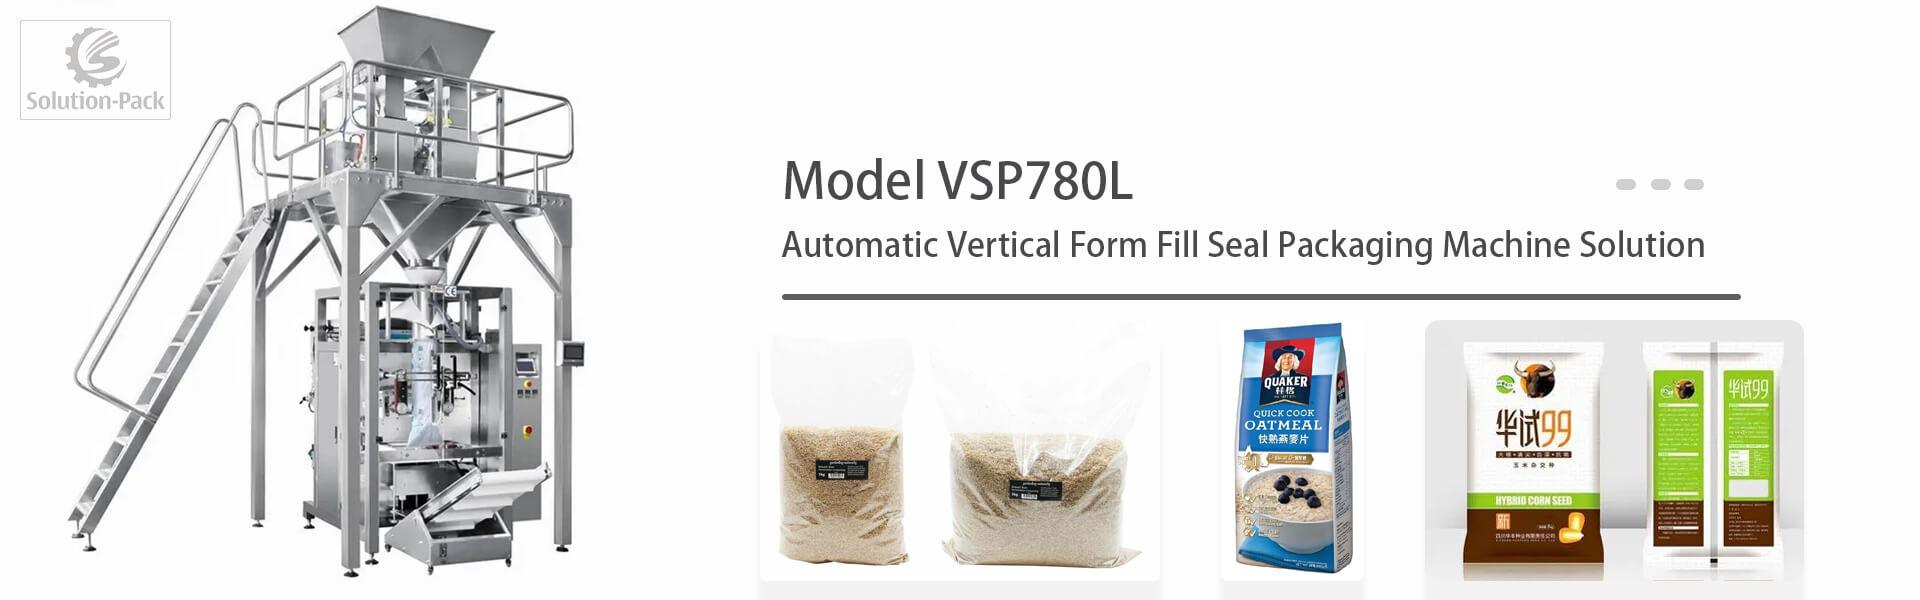 Solution-Pack | Model VSP780L vertical form fill seal machine packaging solution | Heading Banner Picture